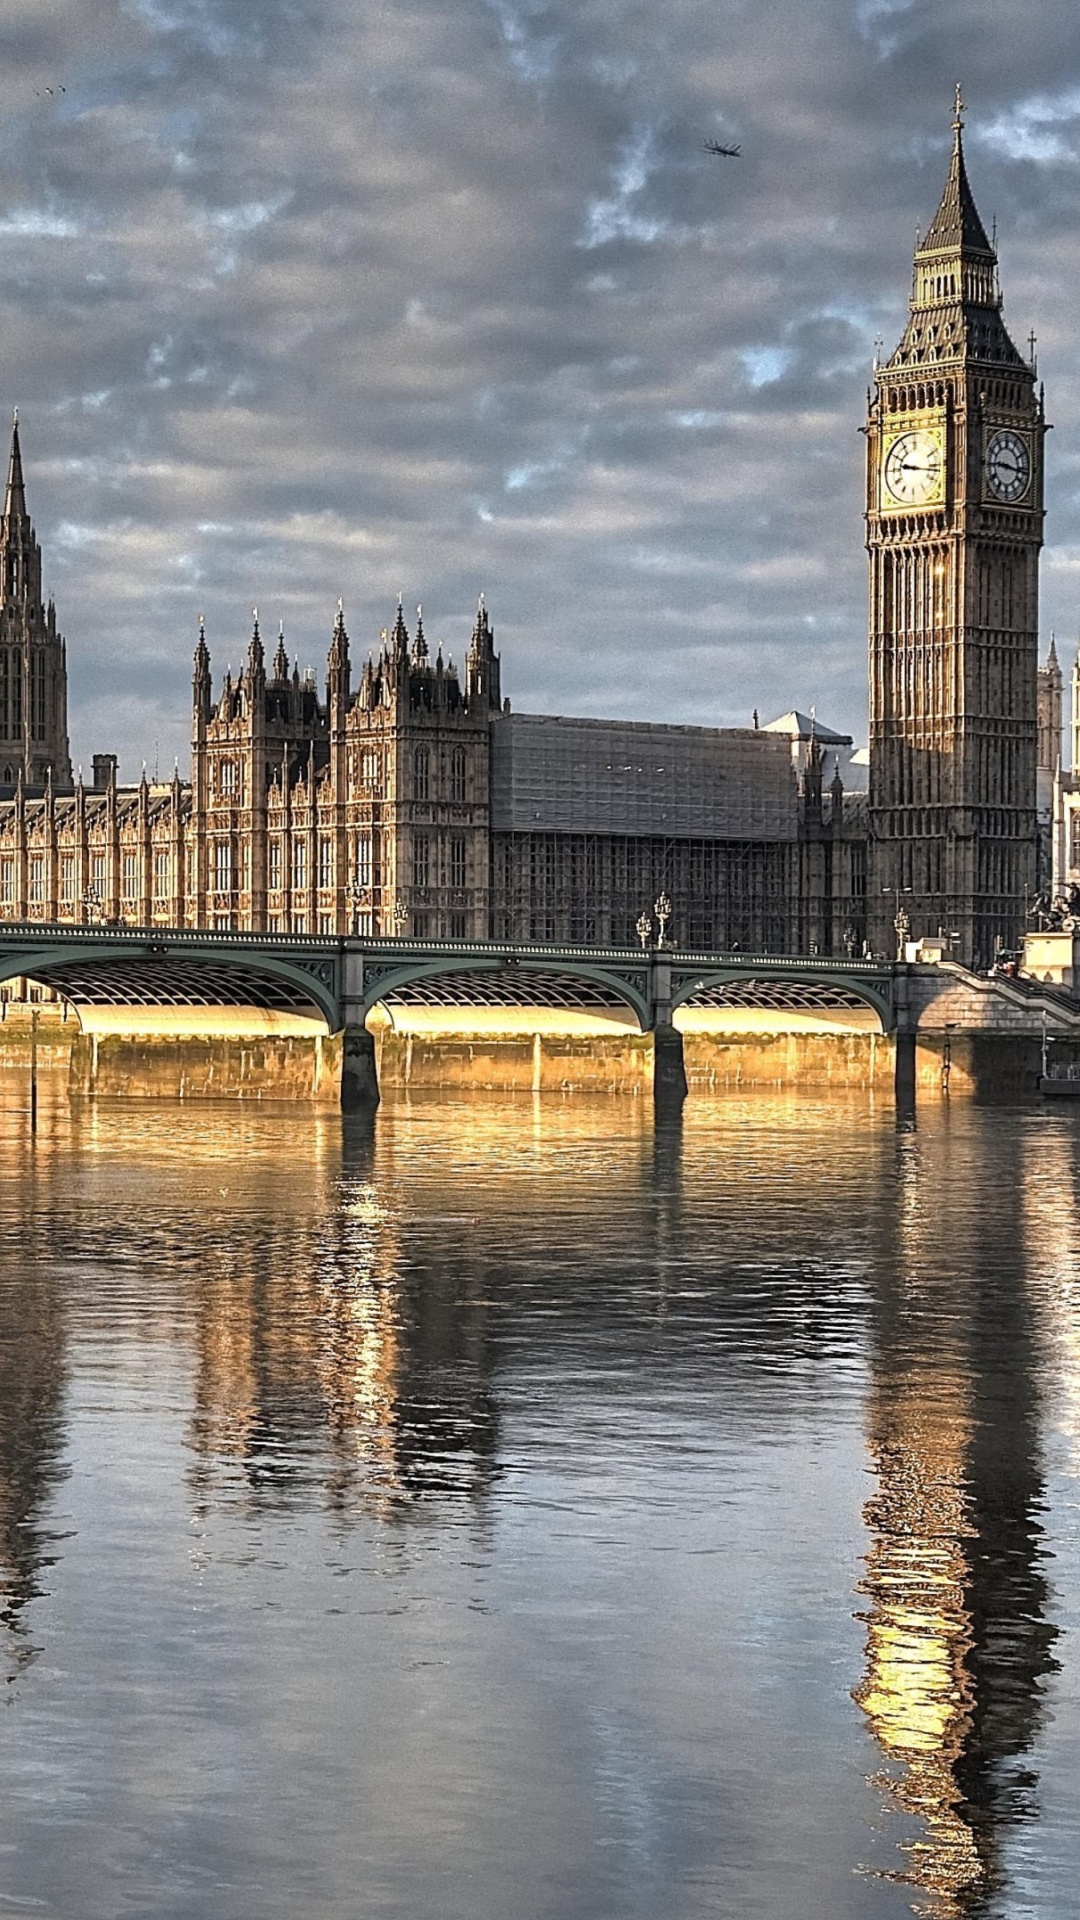 Das Palace of Westminster in London Wallpaper 1080x1920